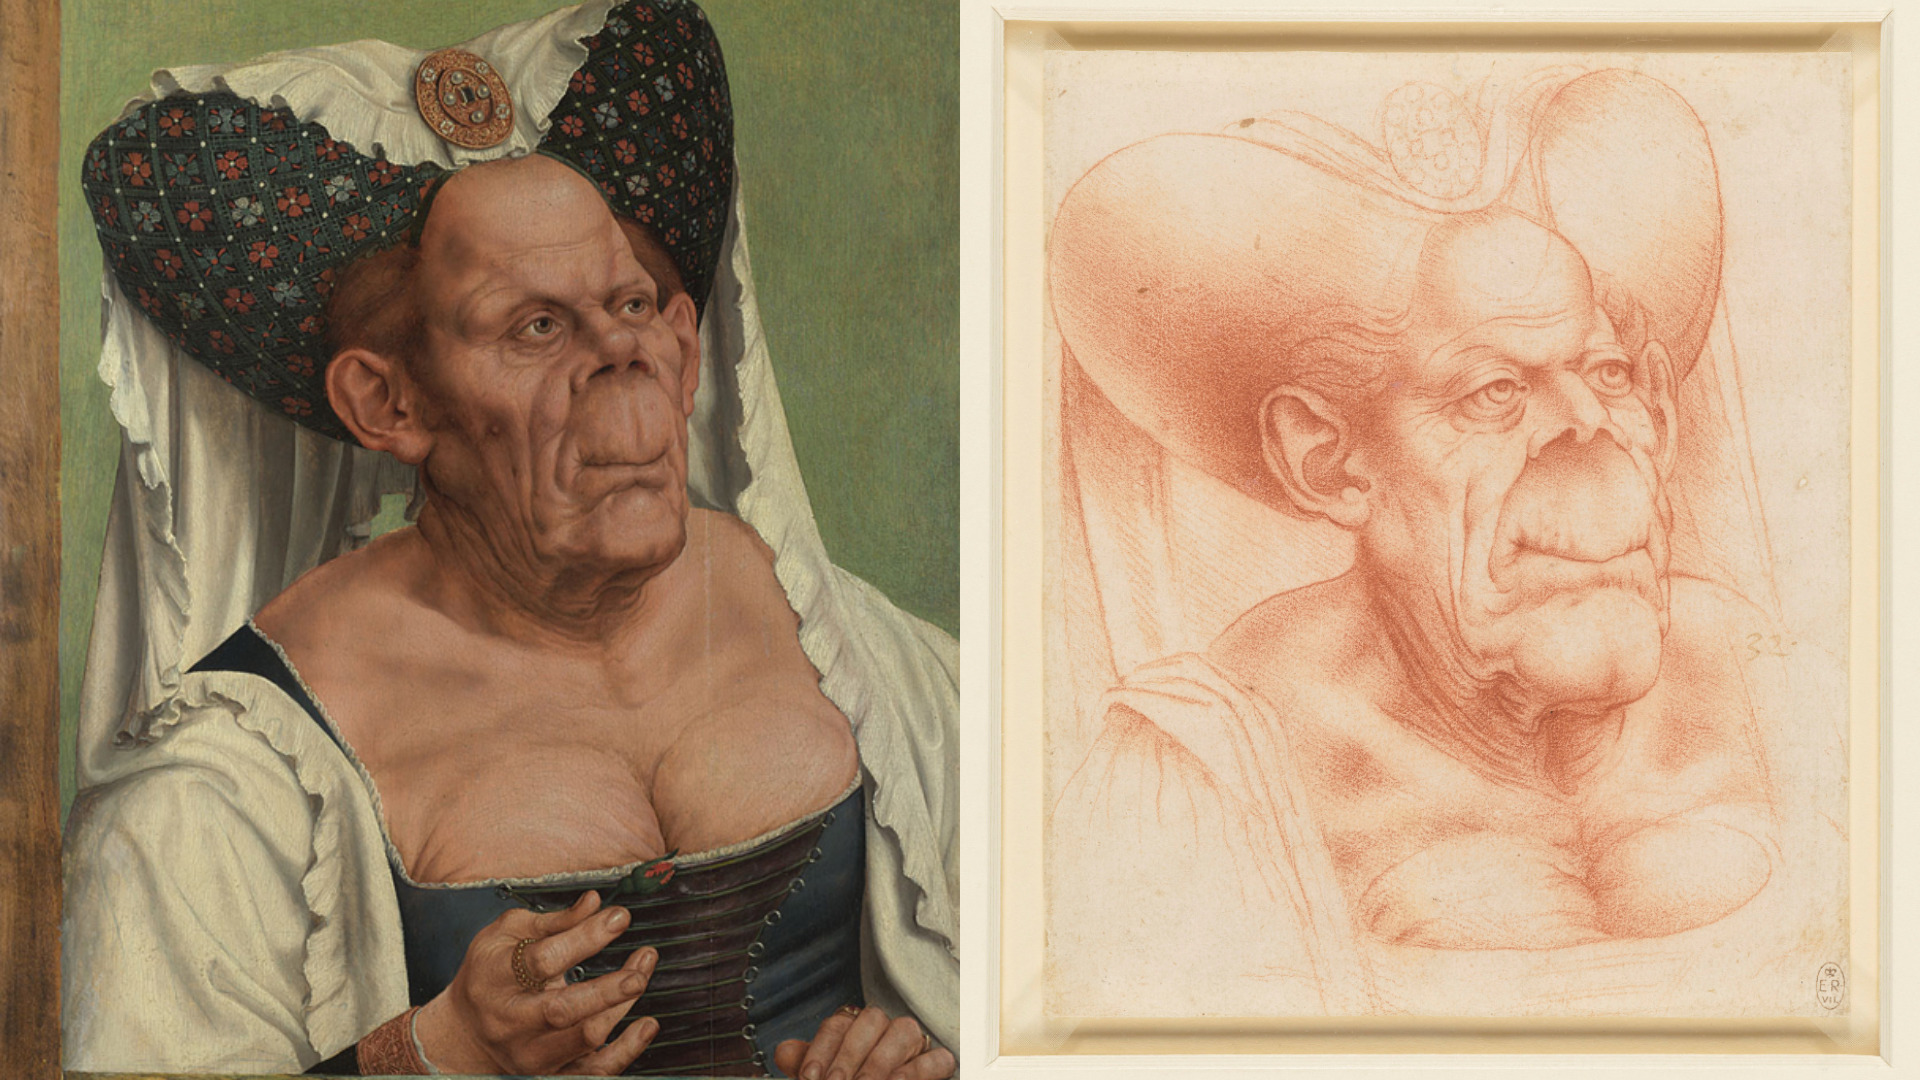 Left
An Old Woman Quinten Massys ('The Ugly Duchess') about 1513, Quinten Massys (1465/6 – 1530), Oil on oak, 62.4 x 45.5 cm, The National Gallery, London
Right
An Old Woman, Copy after Leonardo da Vinci 1510-20, Red chalk on paper, 17.2 x 14.3 cm, Royal Collection Trust - © Her Majesty Queen Elizabeth II 2022